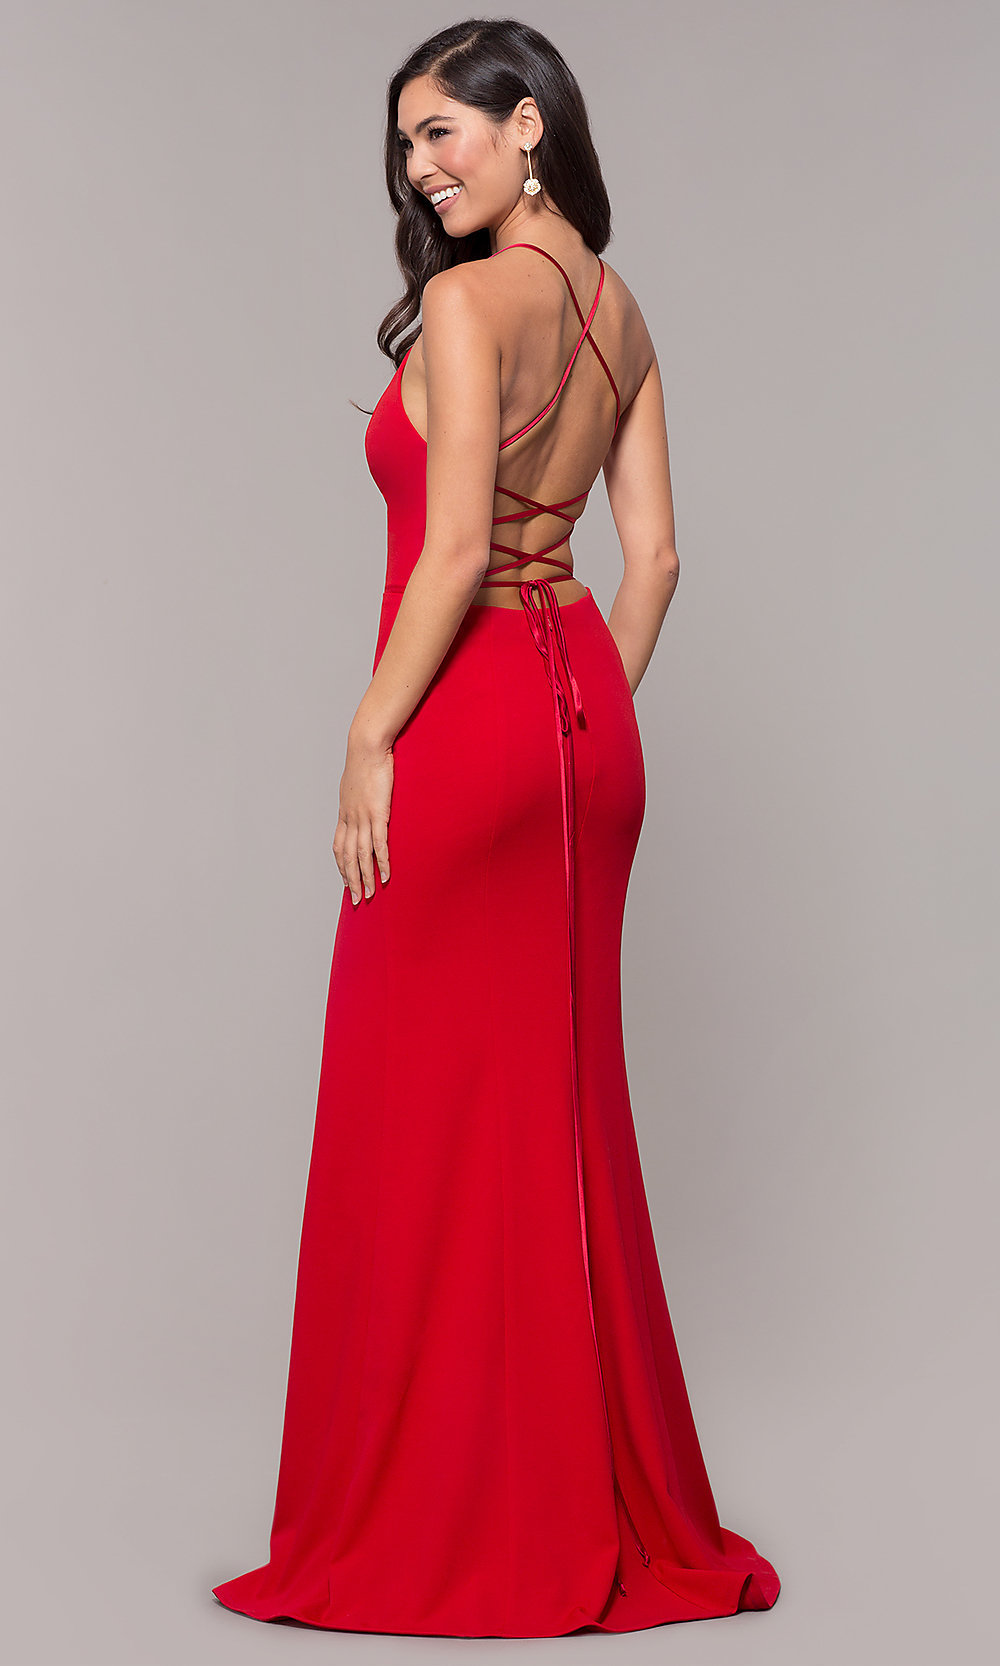 The Open back cocktail dress. 60+ Most Fashionable Semi Formal Wedding Dresses for Female Guests - 2